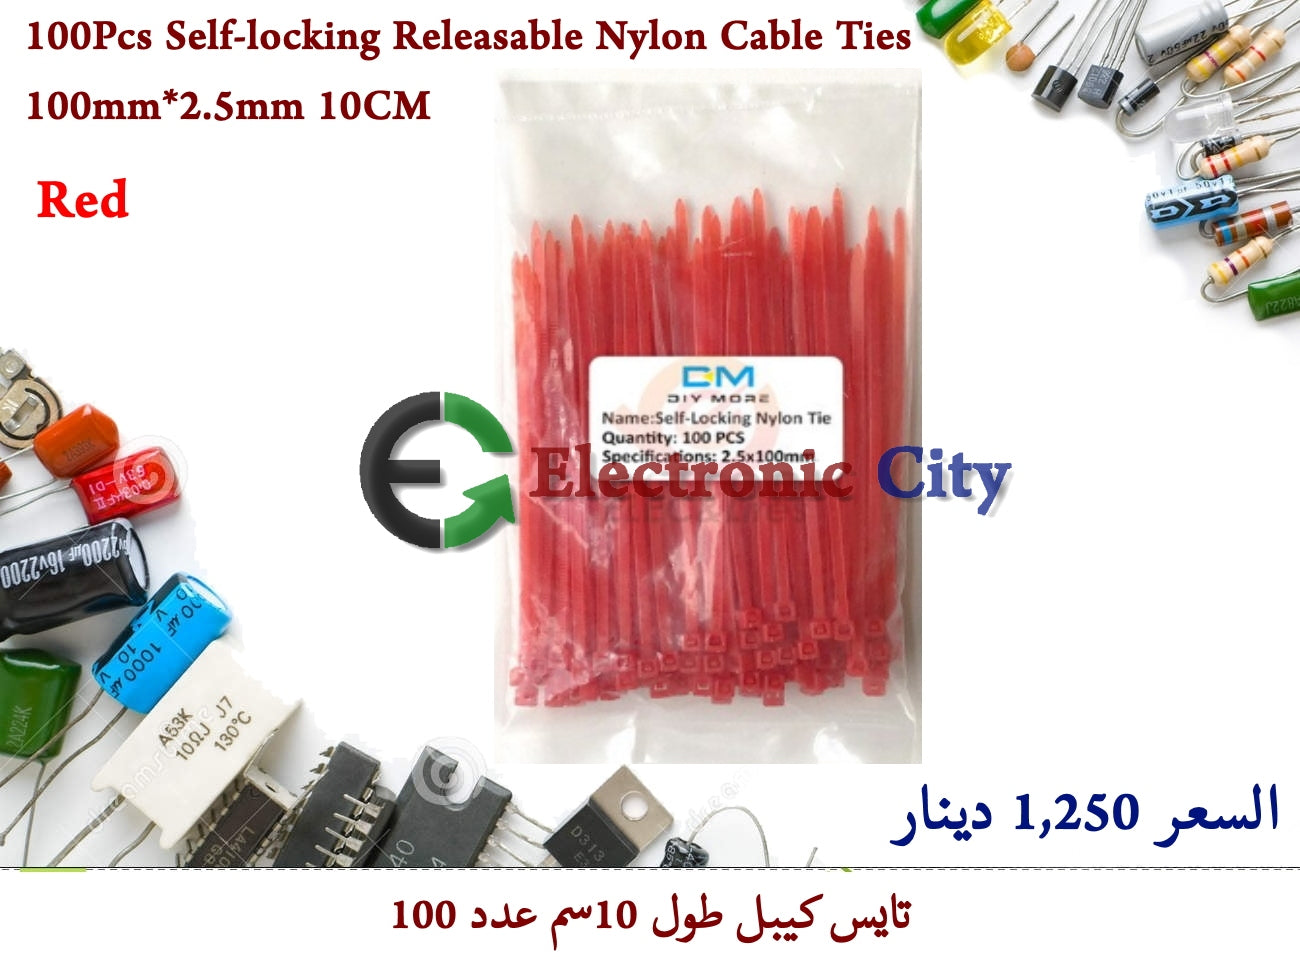 100Pcs Self-locking Releasable Nylon Cable Ties 100mmX2.5mm 10CM Blue.5mm 10CM Red